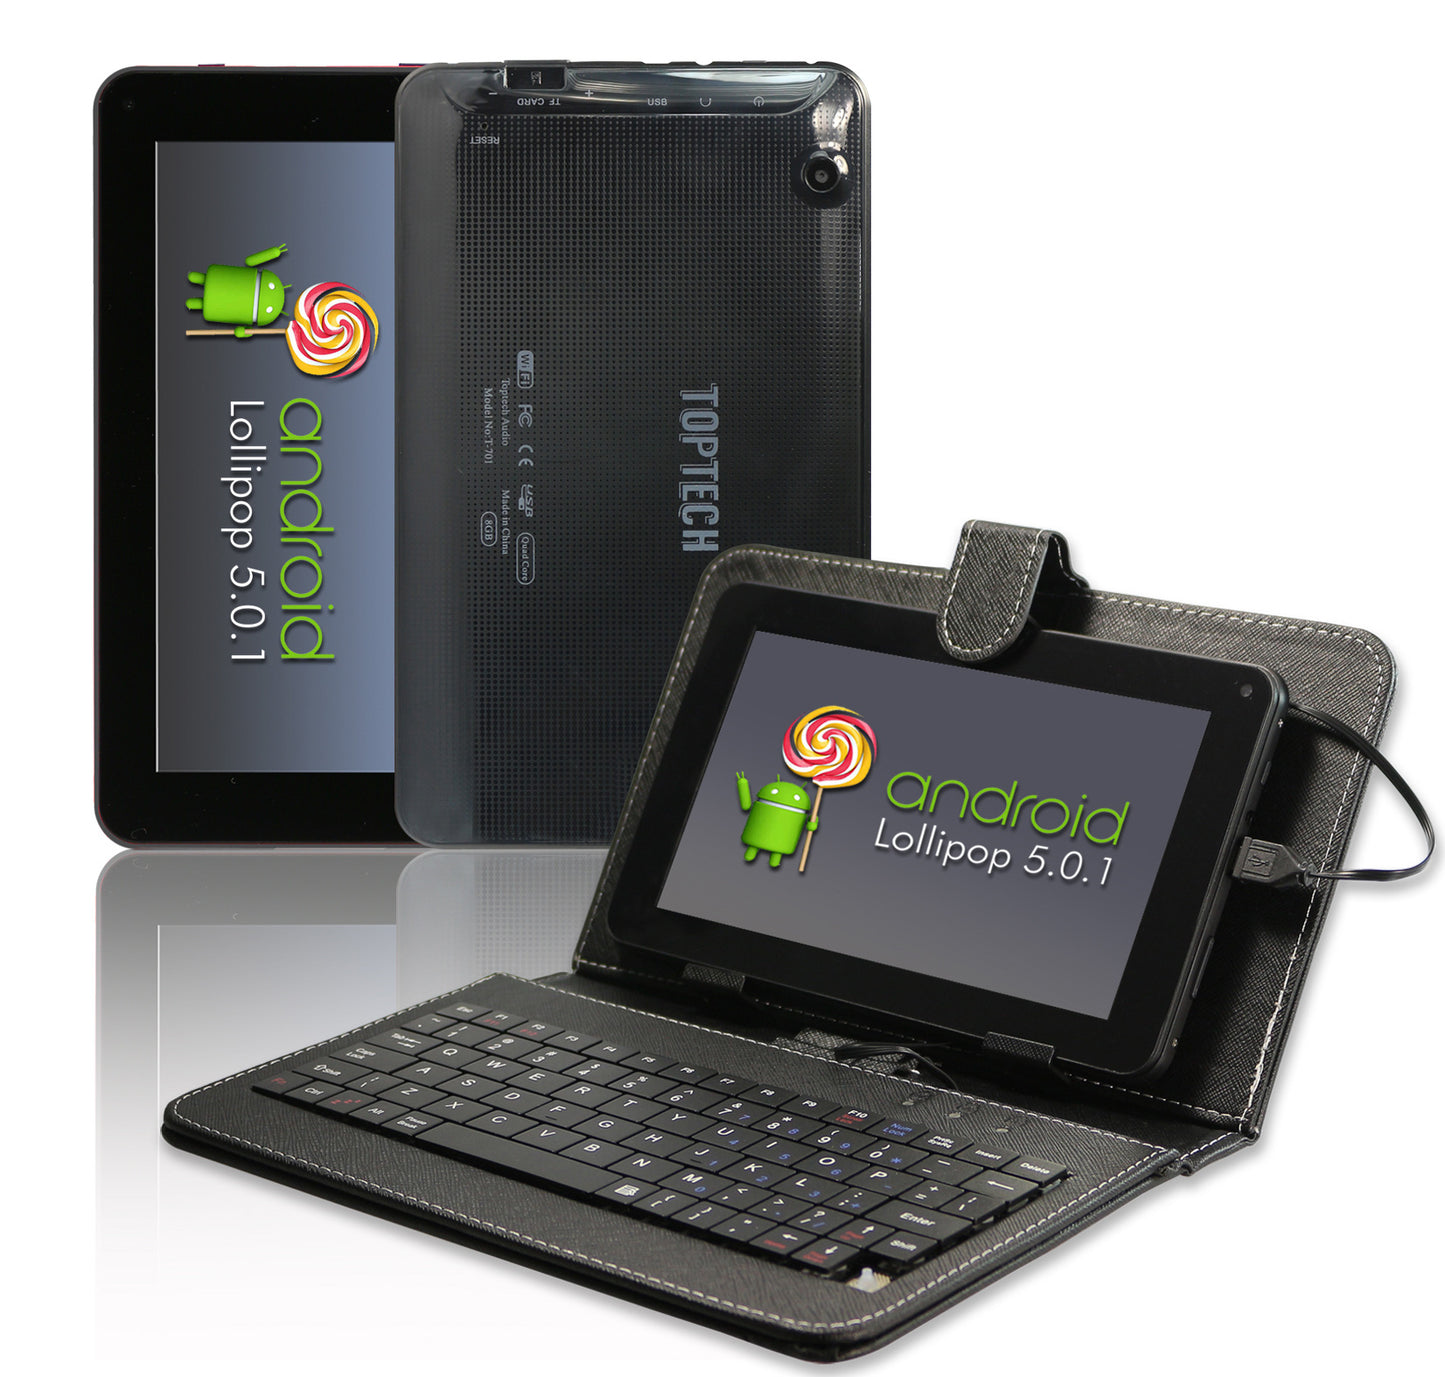 7’’ Tablet PC - Capacitive 5 Point Touch Screen